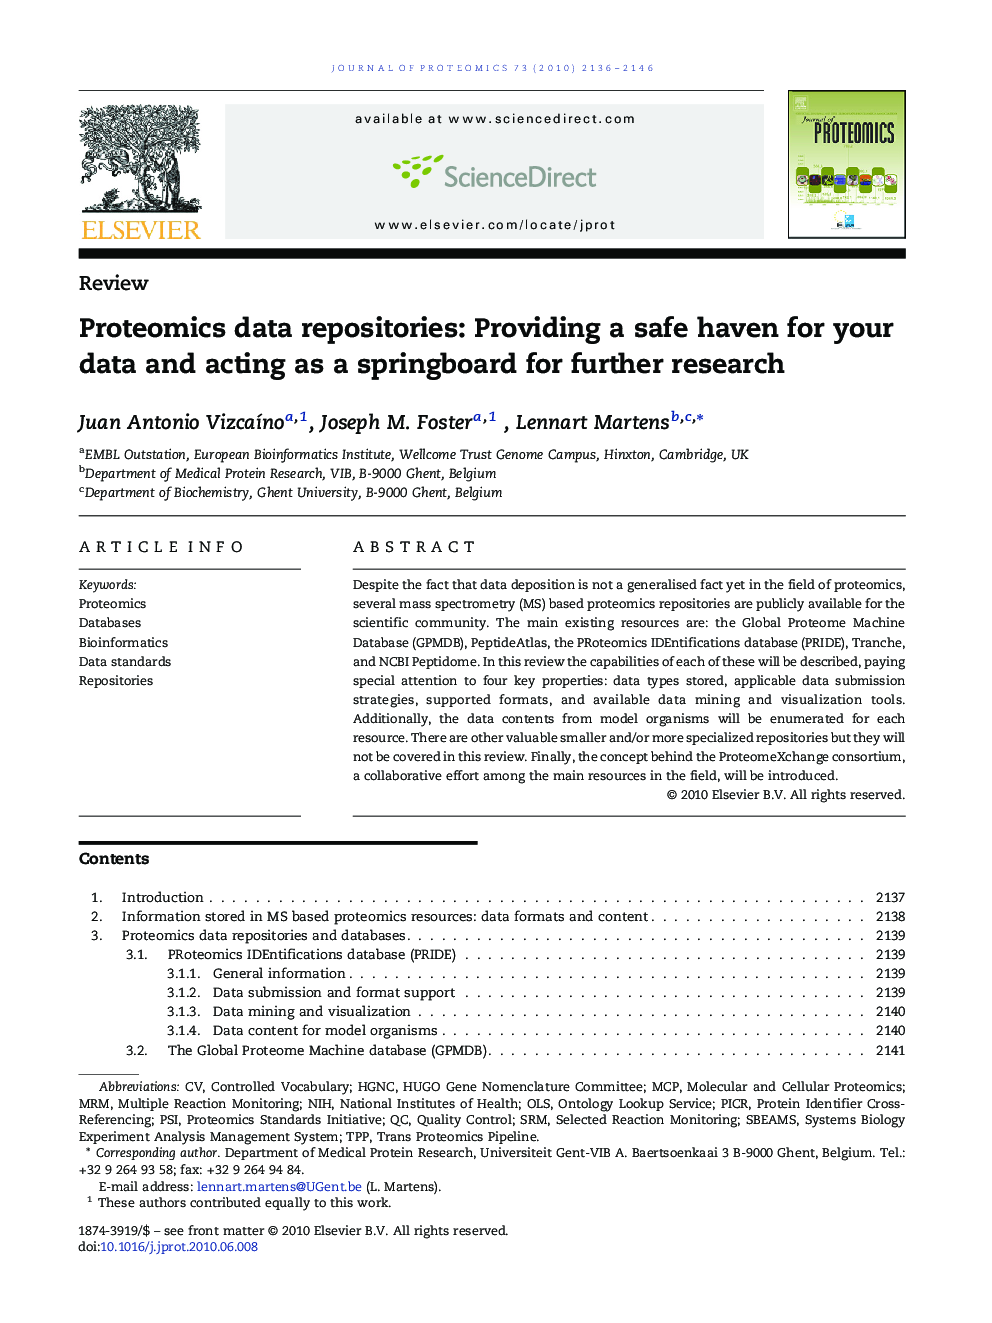 Proteomics data repositories: Providing a safe haven for your data and acting as a springboard for further research